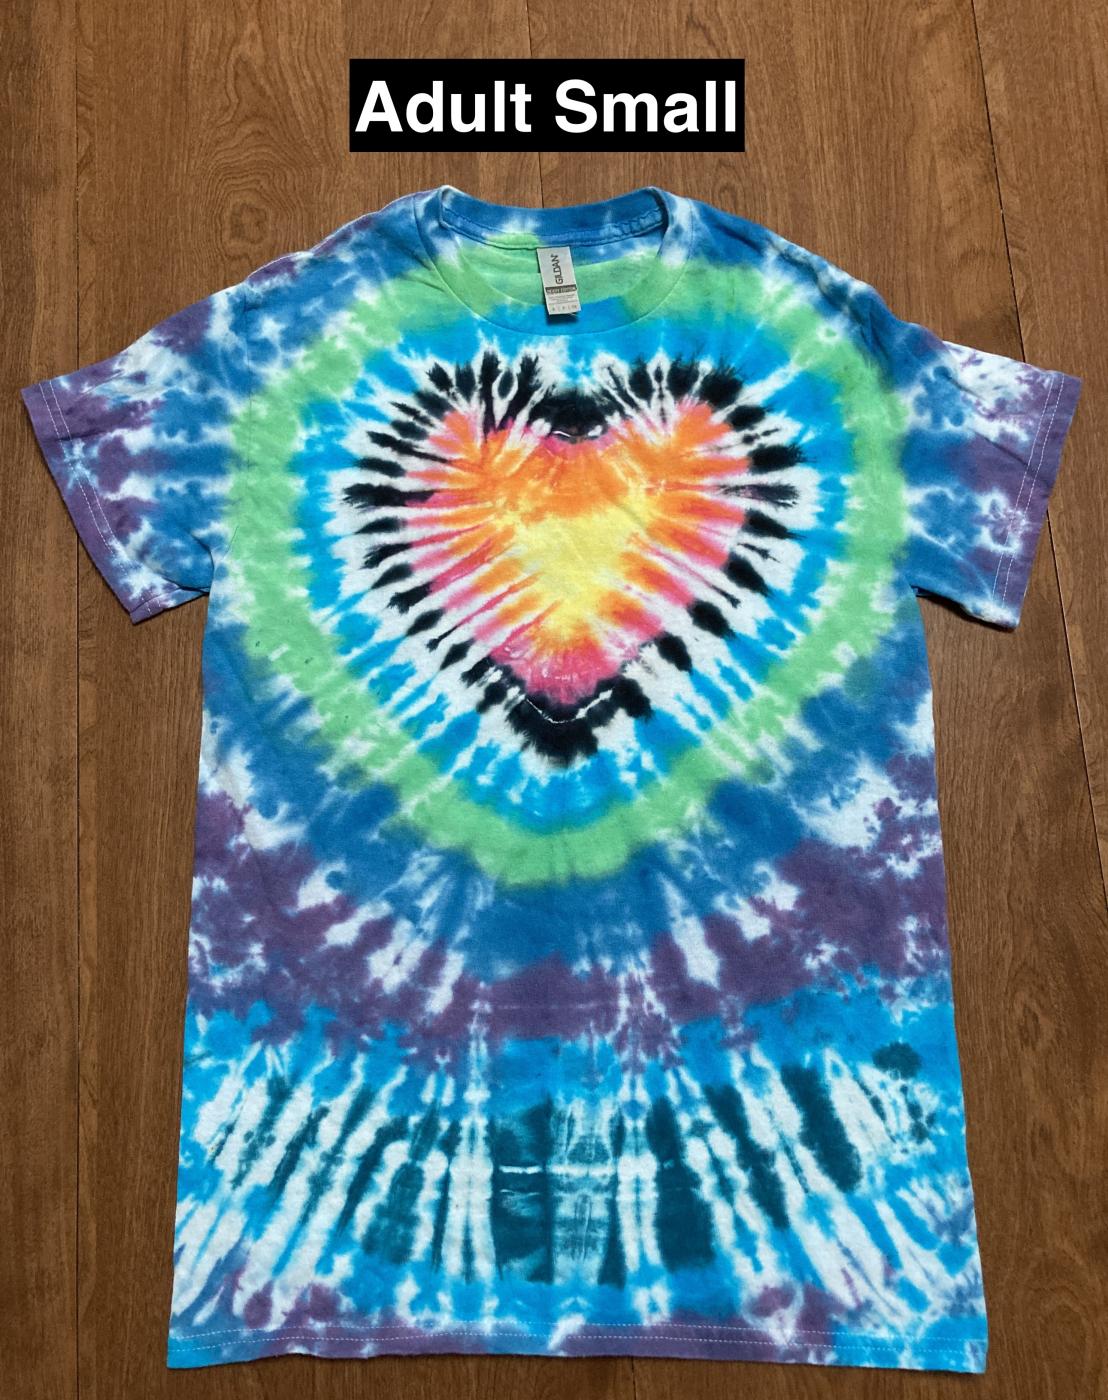 Warm Heart with Green Blue Purple Rings Tie Dye T Shirt Adult Small